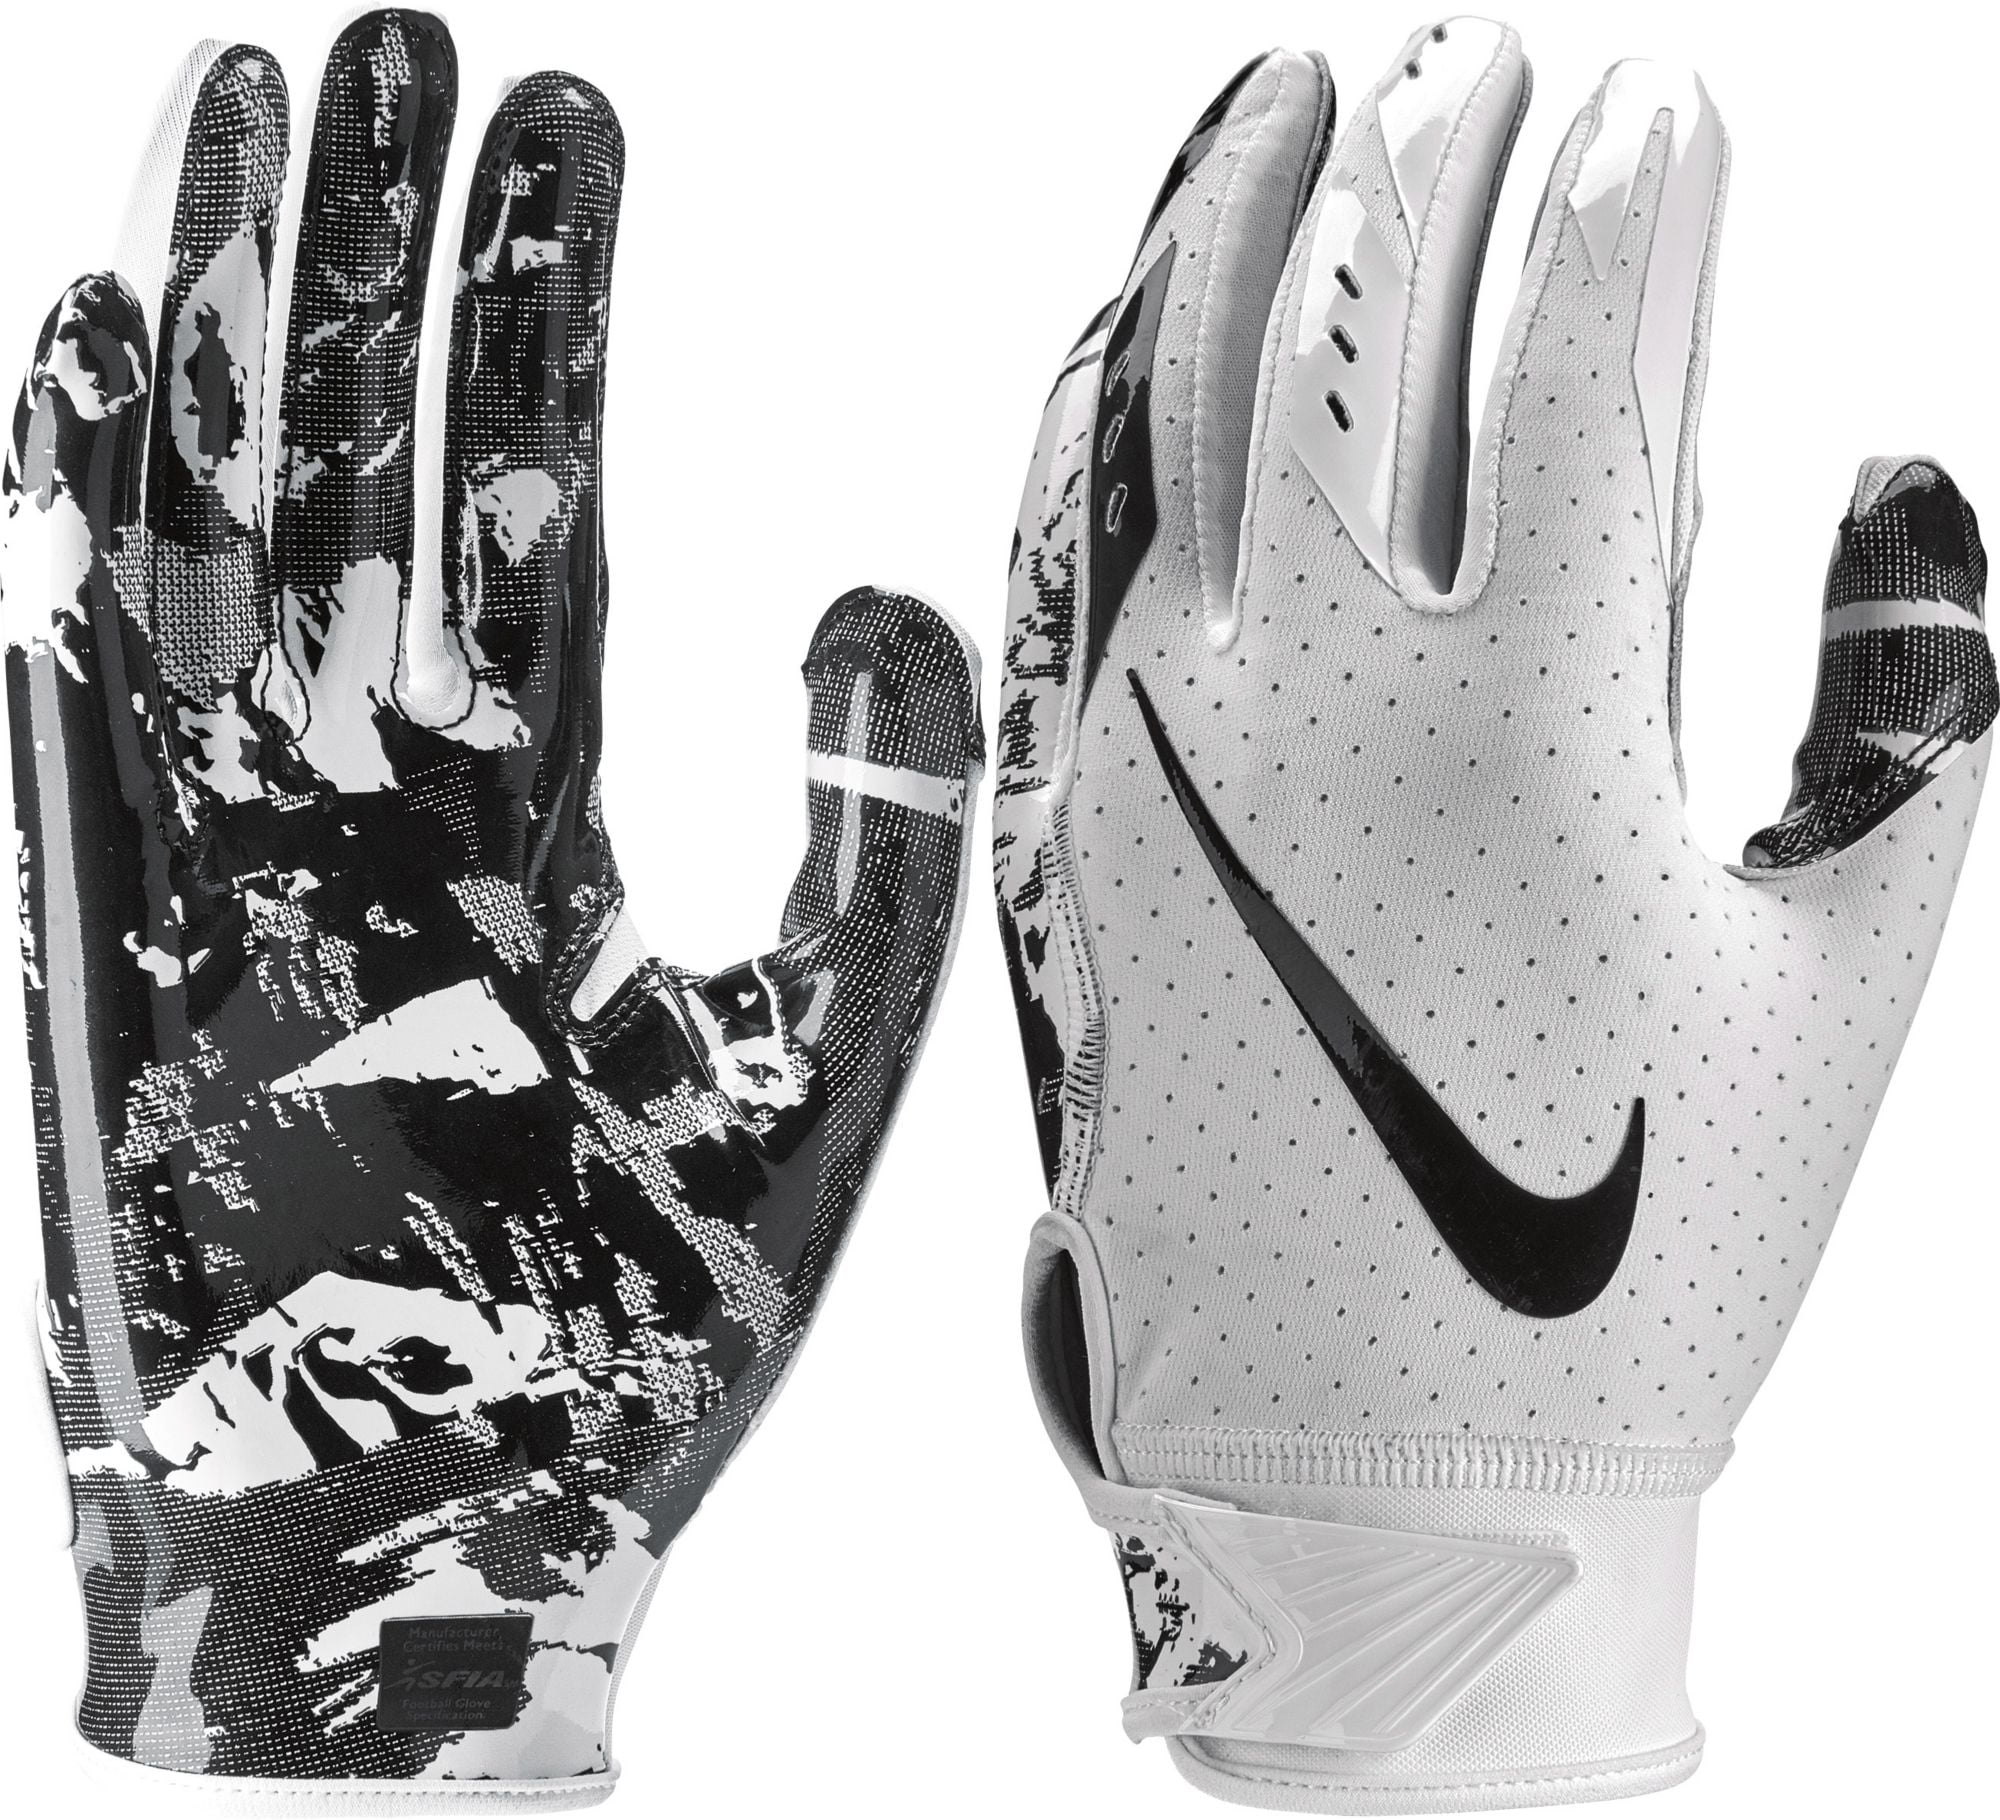 BRAND NEW Nike Vapor Jet 5.0 Receiver Gloves - ADULT & YOUTH SIZES, COLORS  (YOUTH,L,ROYAL BLUE/CHROME) 